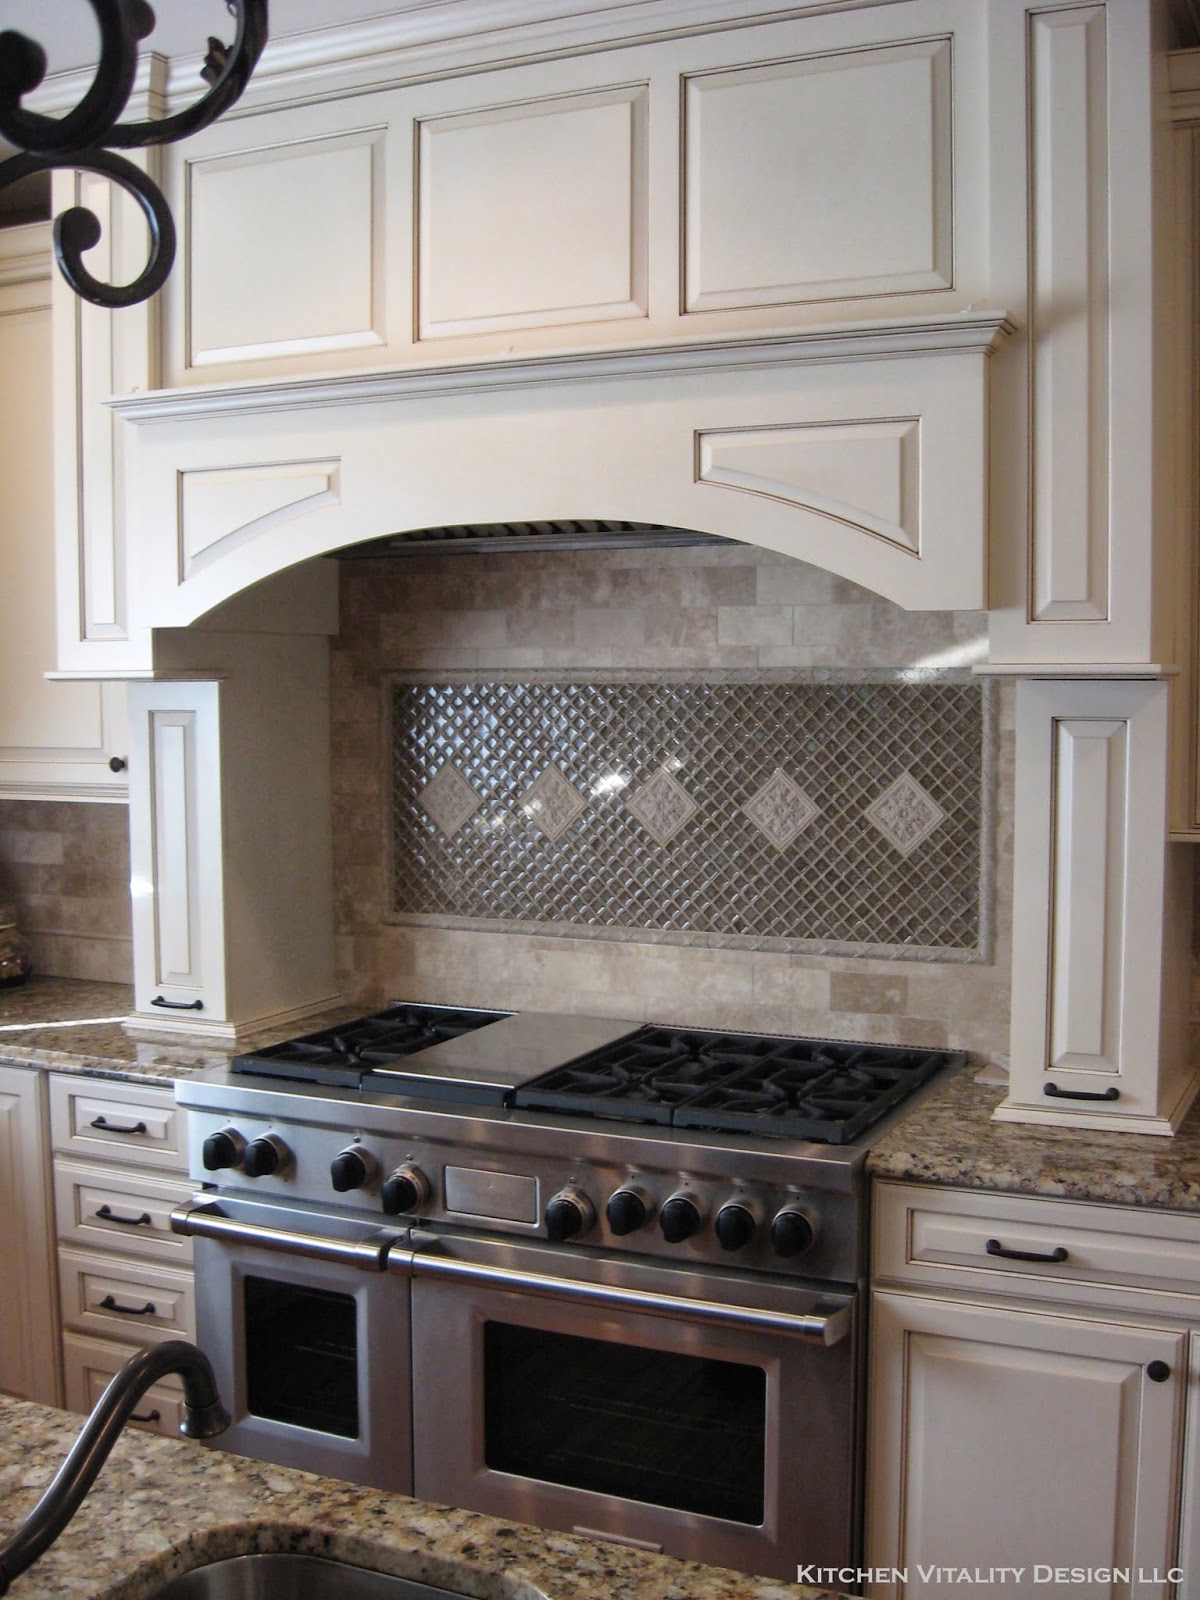 Ask A Kitchen Designer: Is Ventilation Really Necessary?